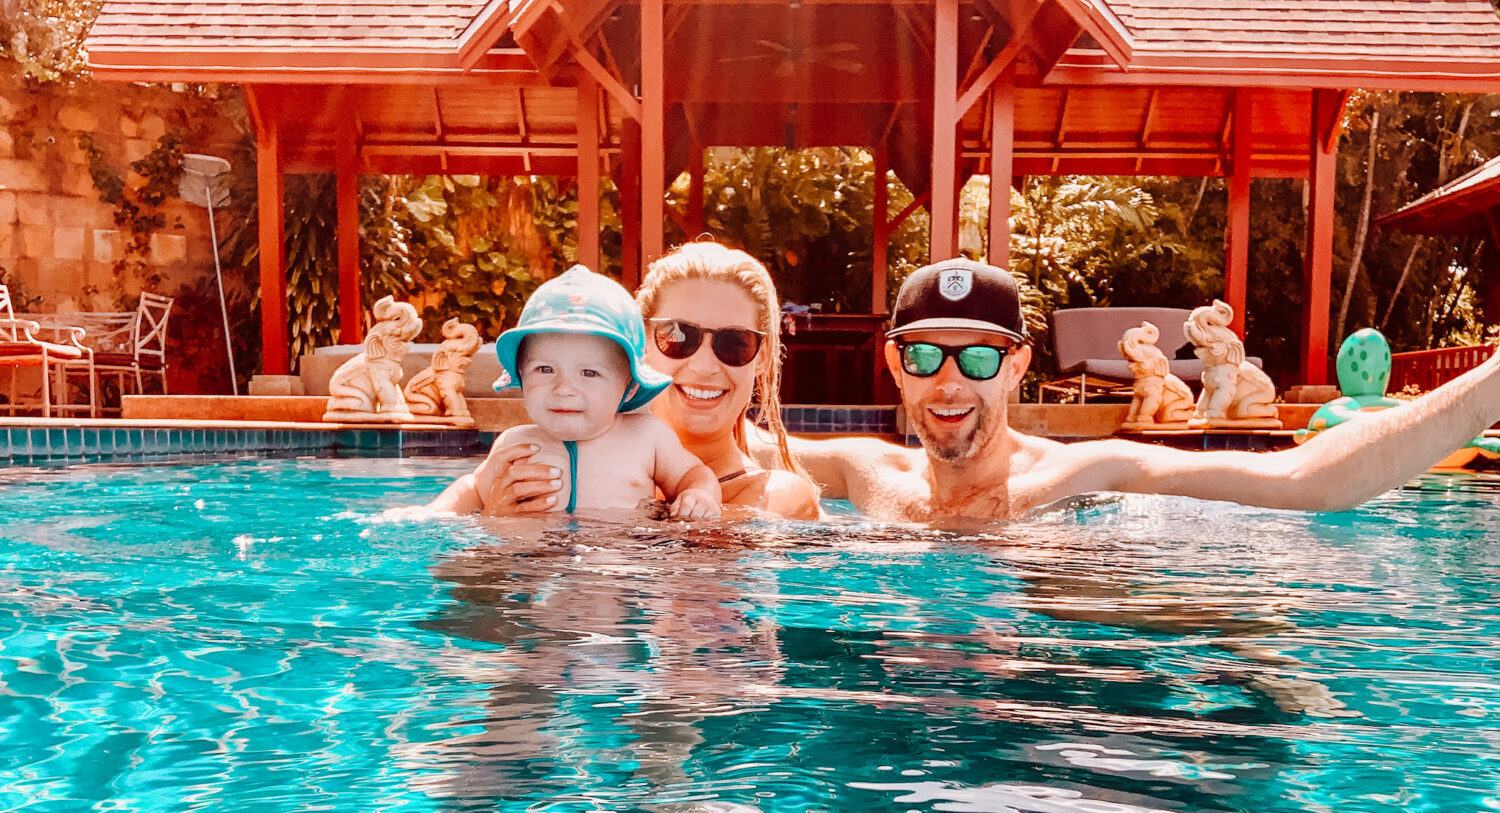 gemma and george family picture in thailand